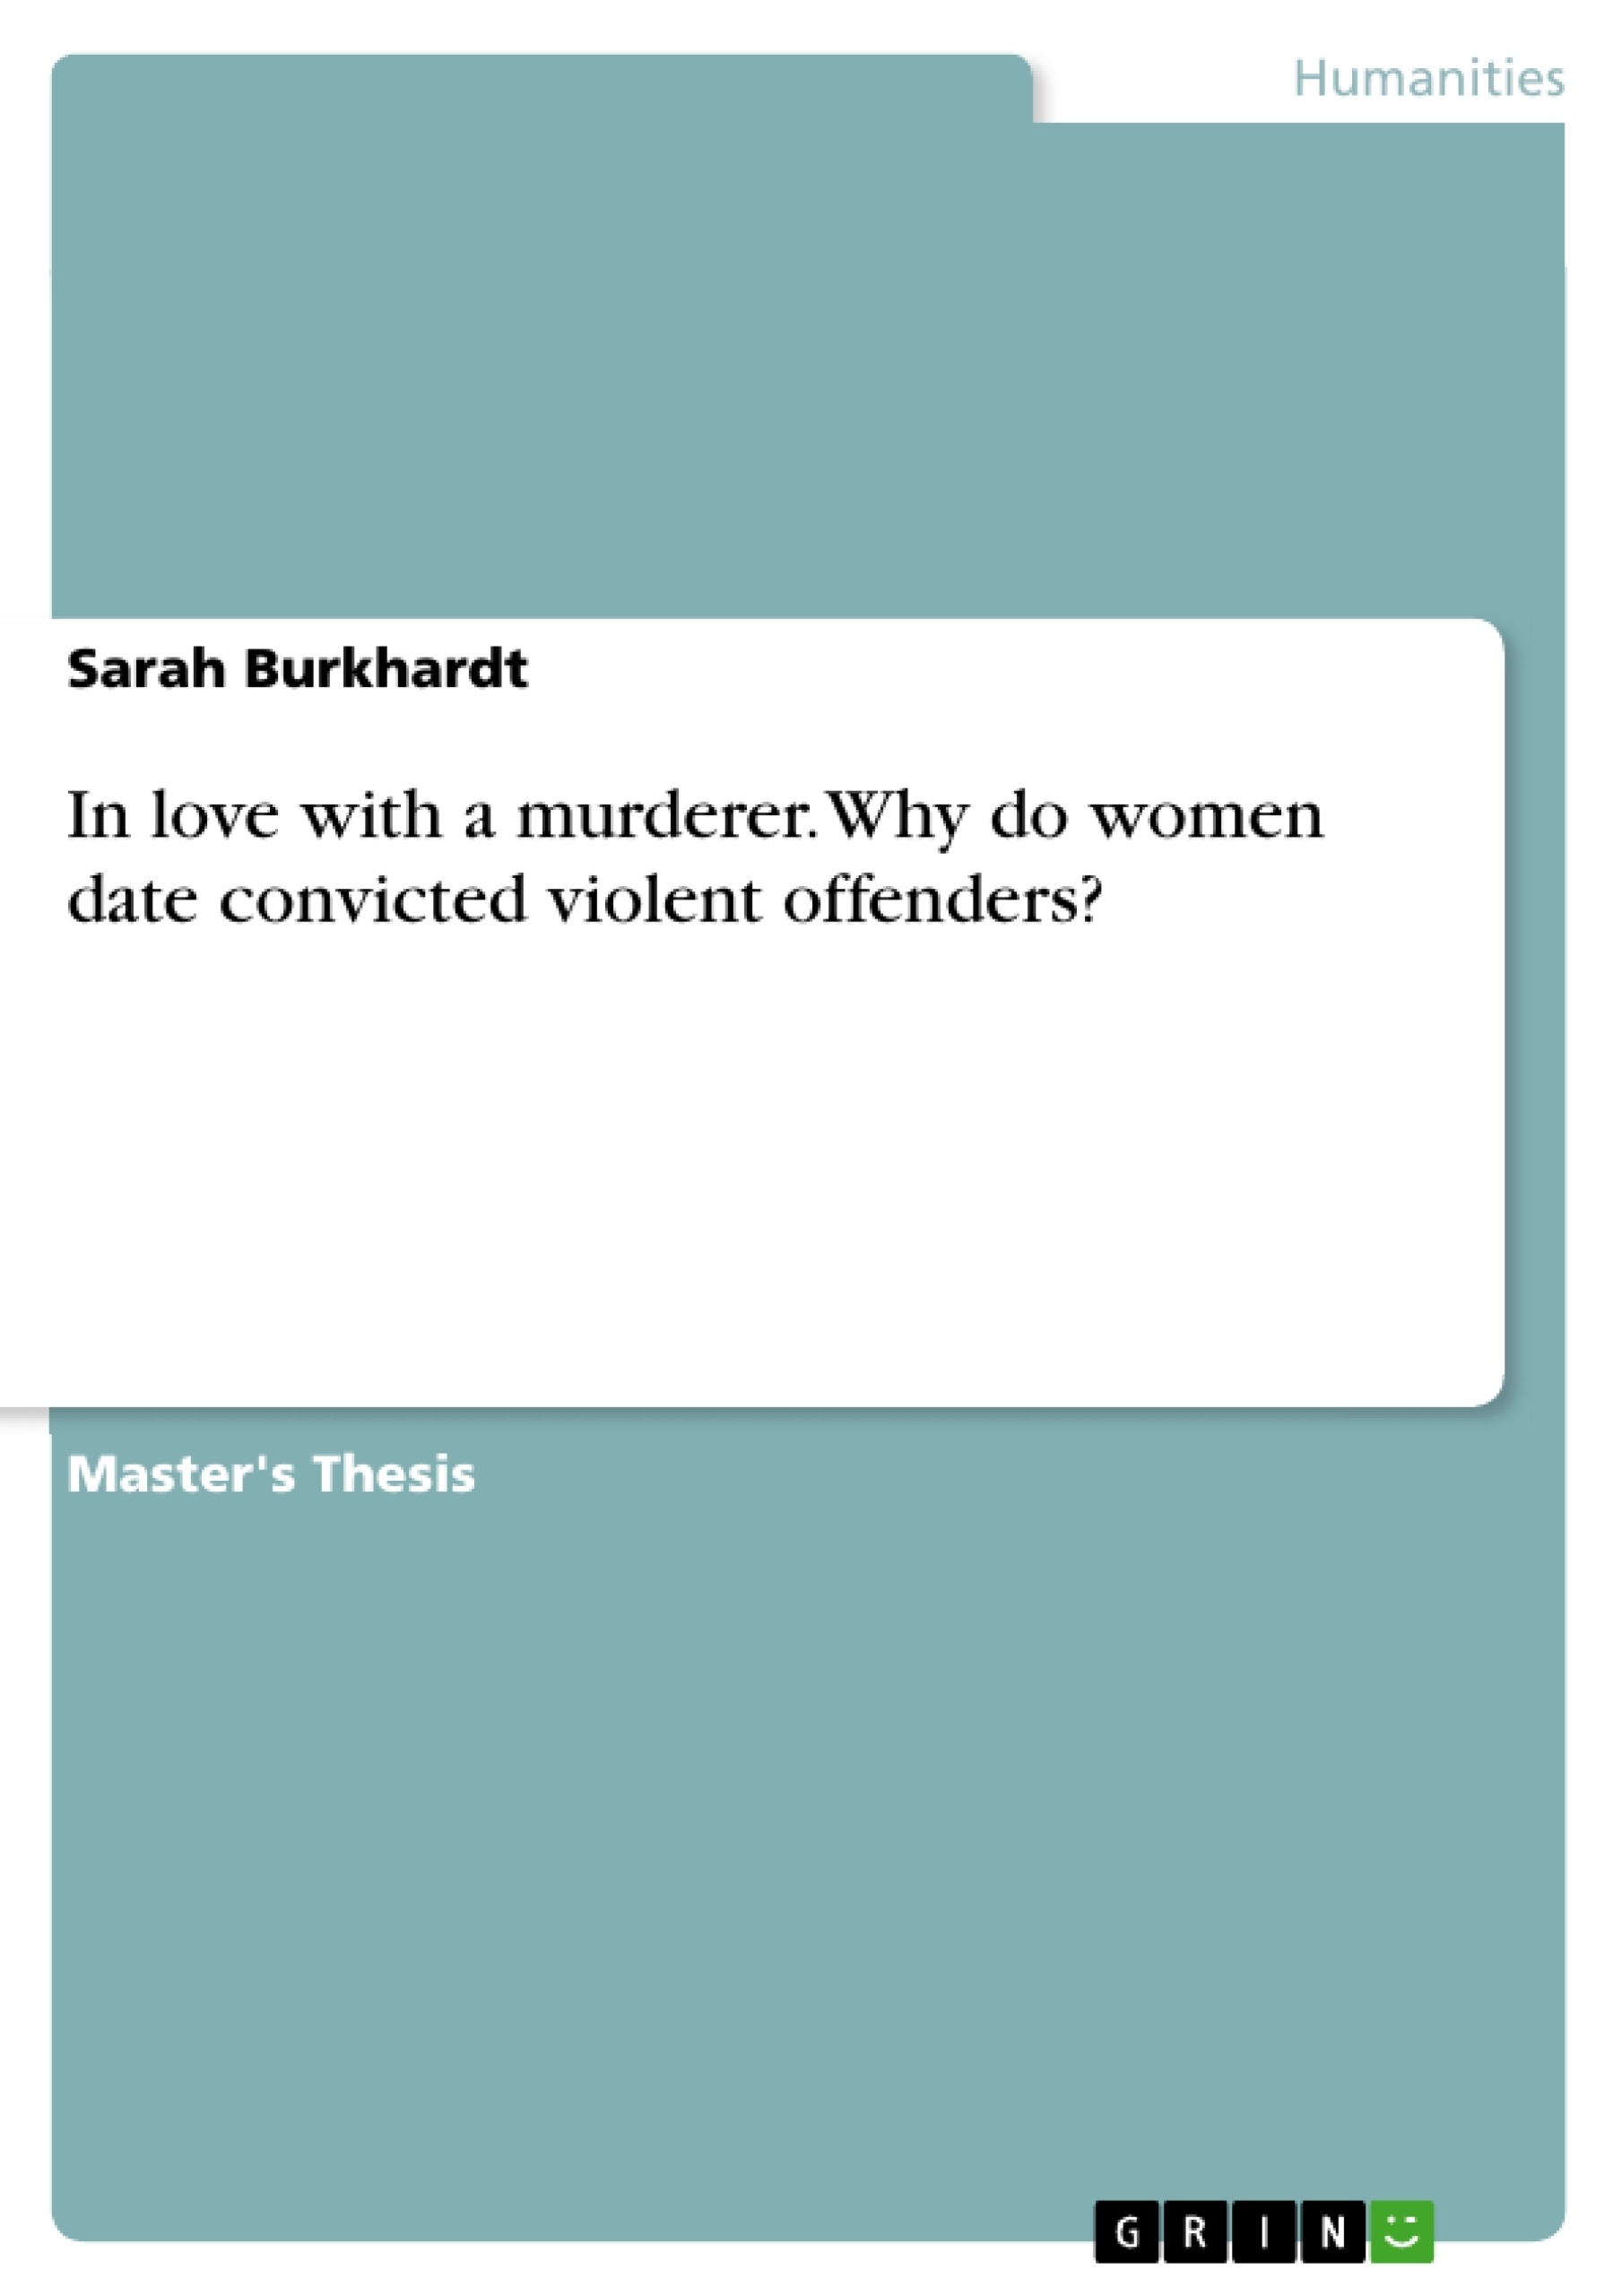 Title: In love with a murderer. Why do women date convicted violent offenders?